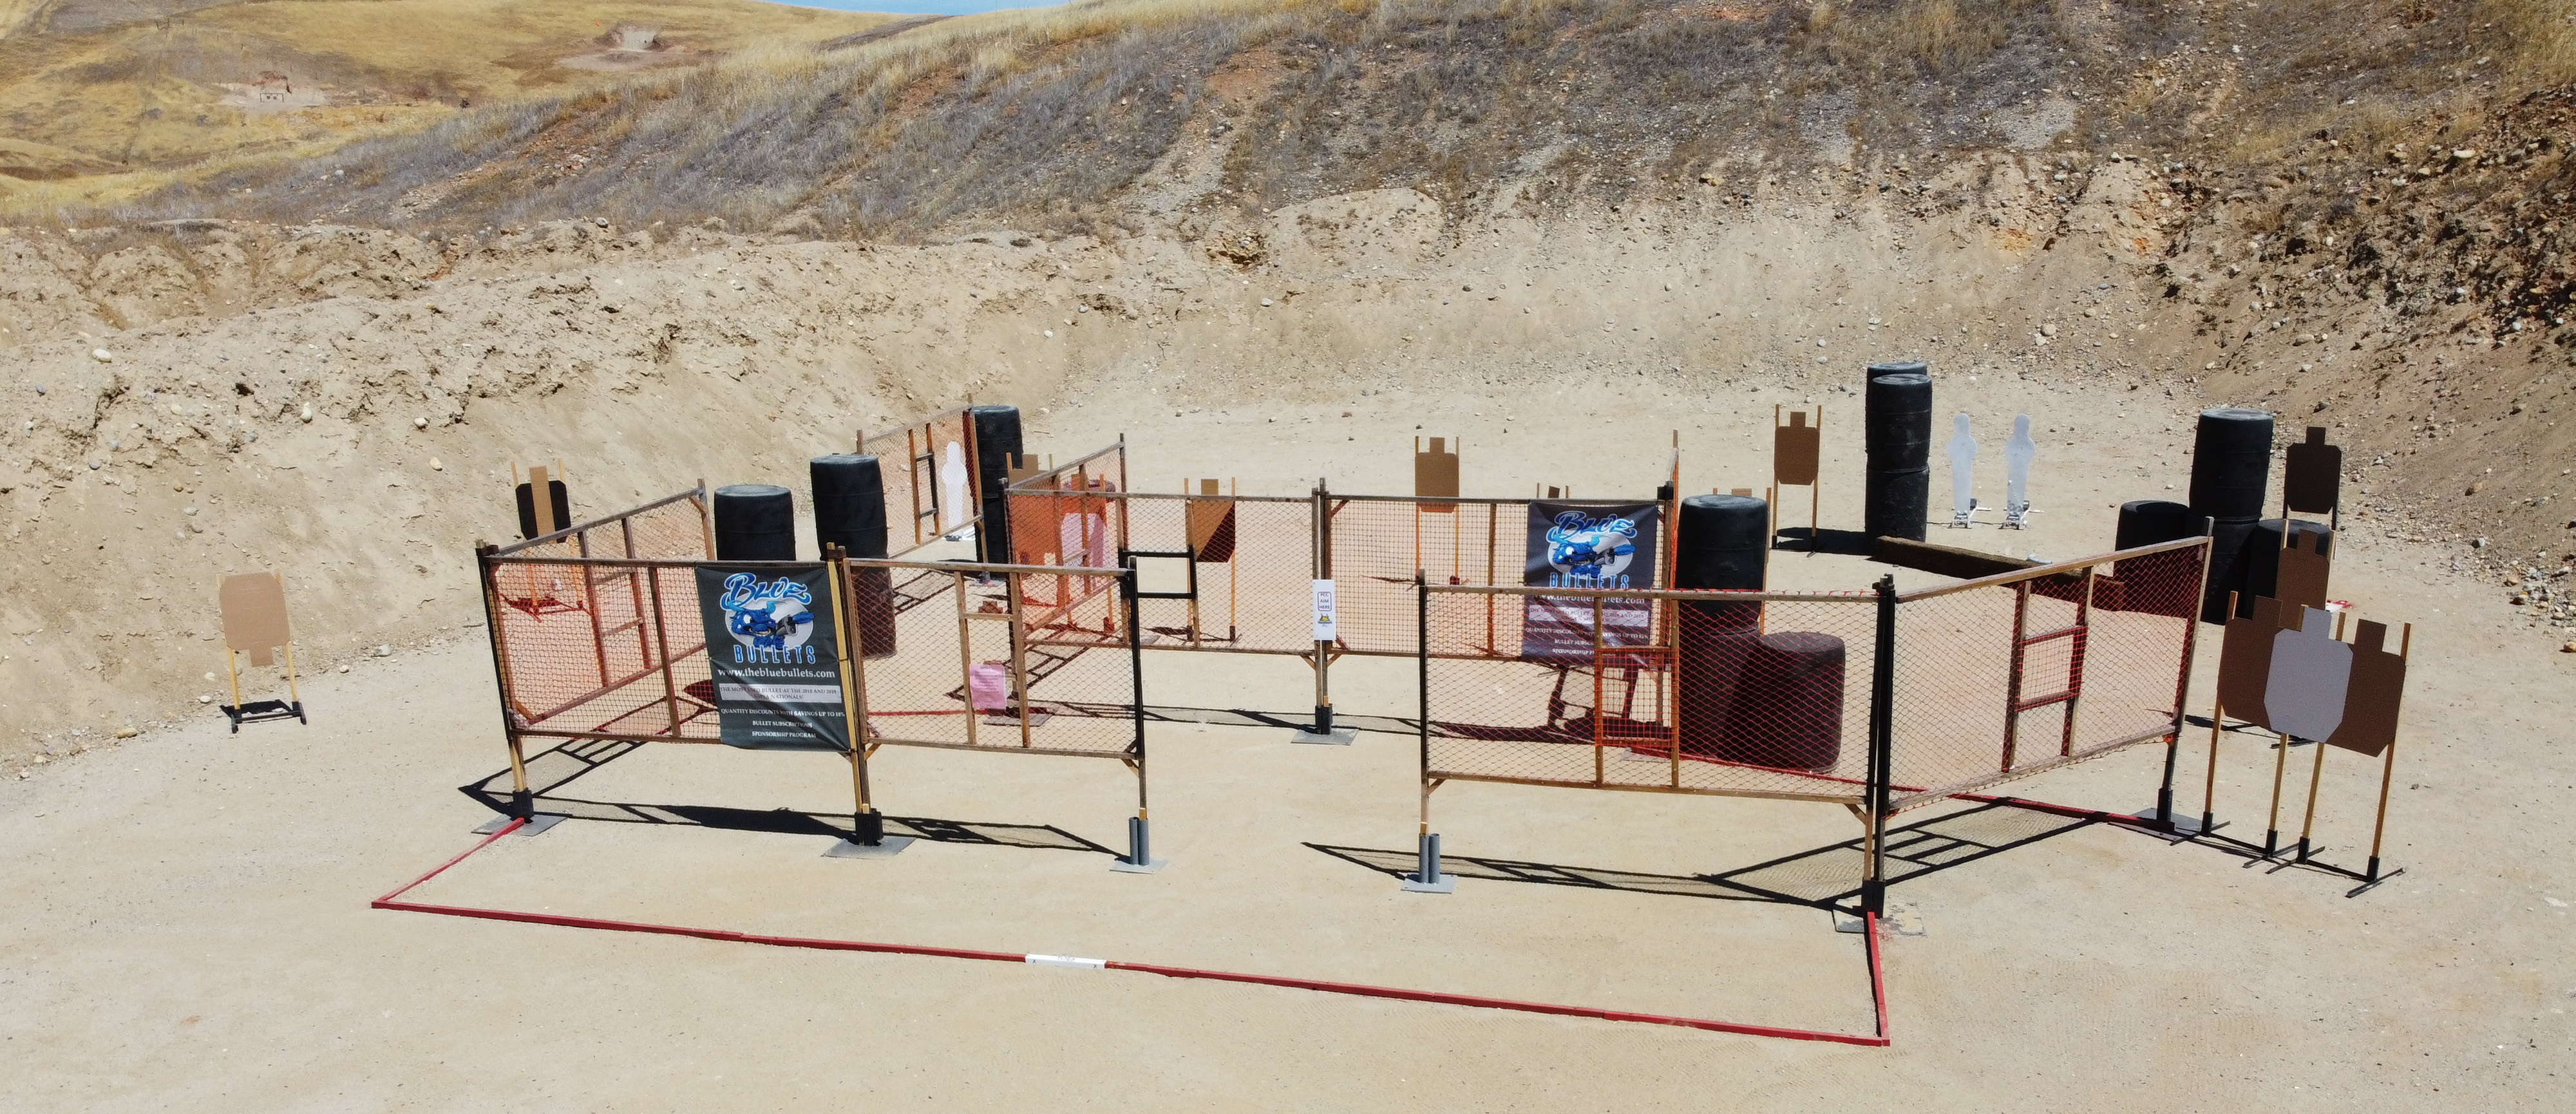 Tired of shooting at static targets at the range? picture